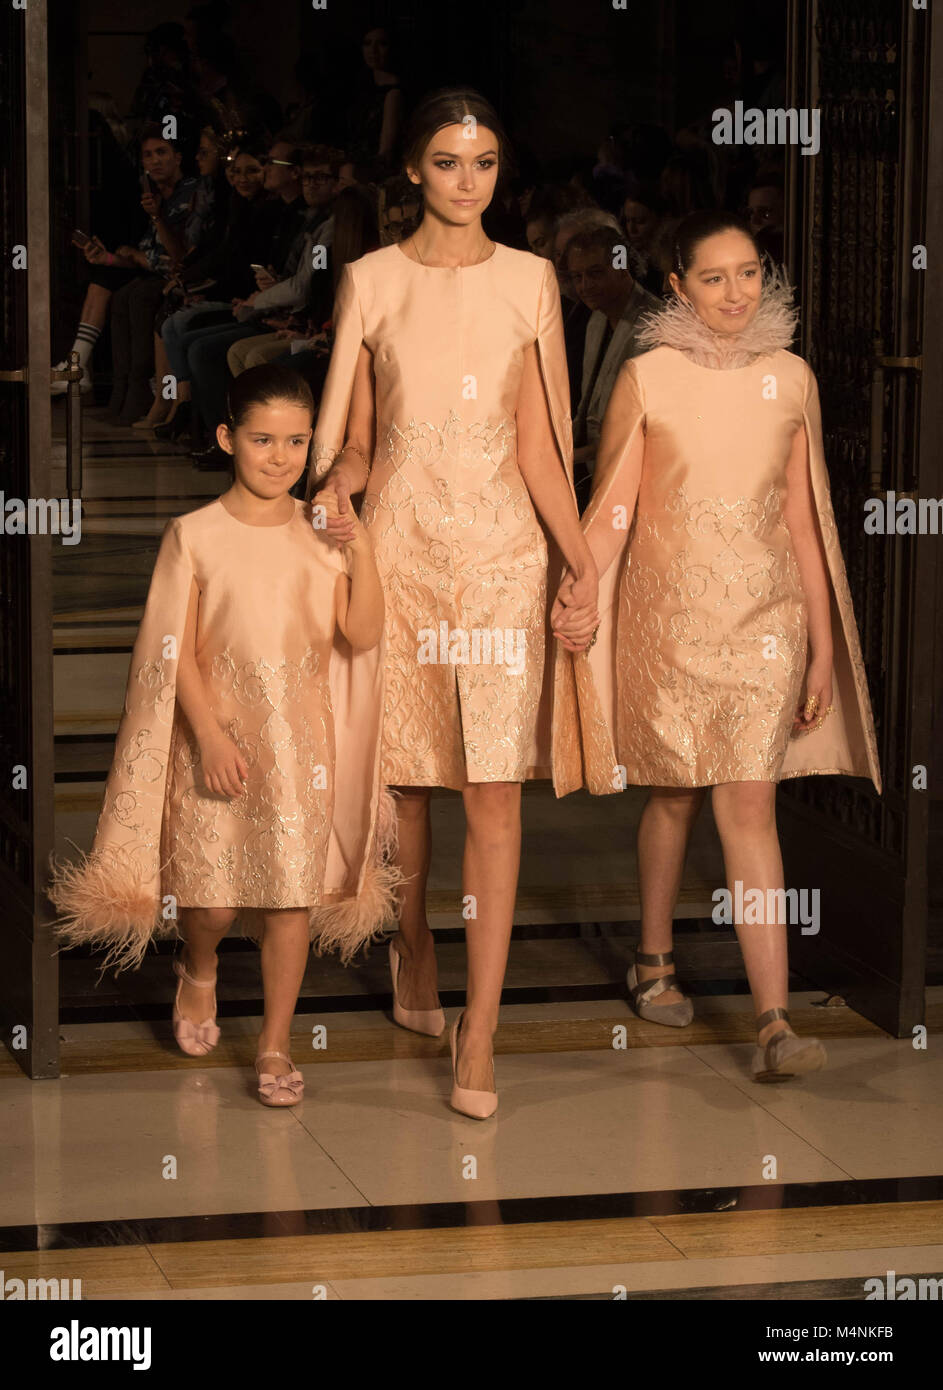 London Fashion Week, The catwalk show of OLGA ROH, A SWISS based S FASHION DESIGNER, who punctuated her show with classic dancers in a stunning presentation Pictured two child models and an adult model in matching outfits.  Credit Ian Davidson/Alamy Live News Stock Photo